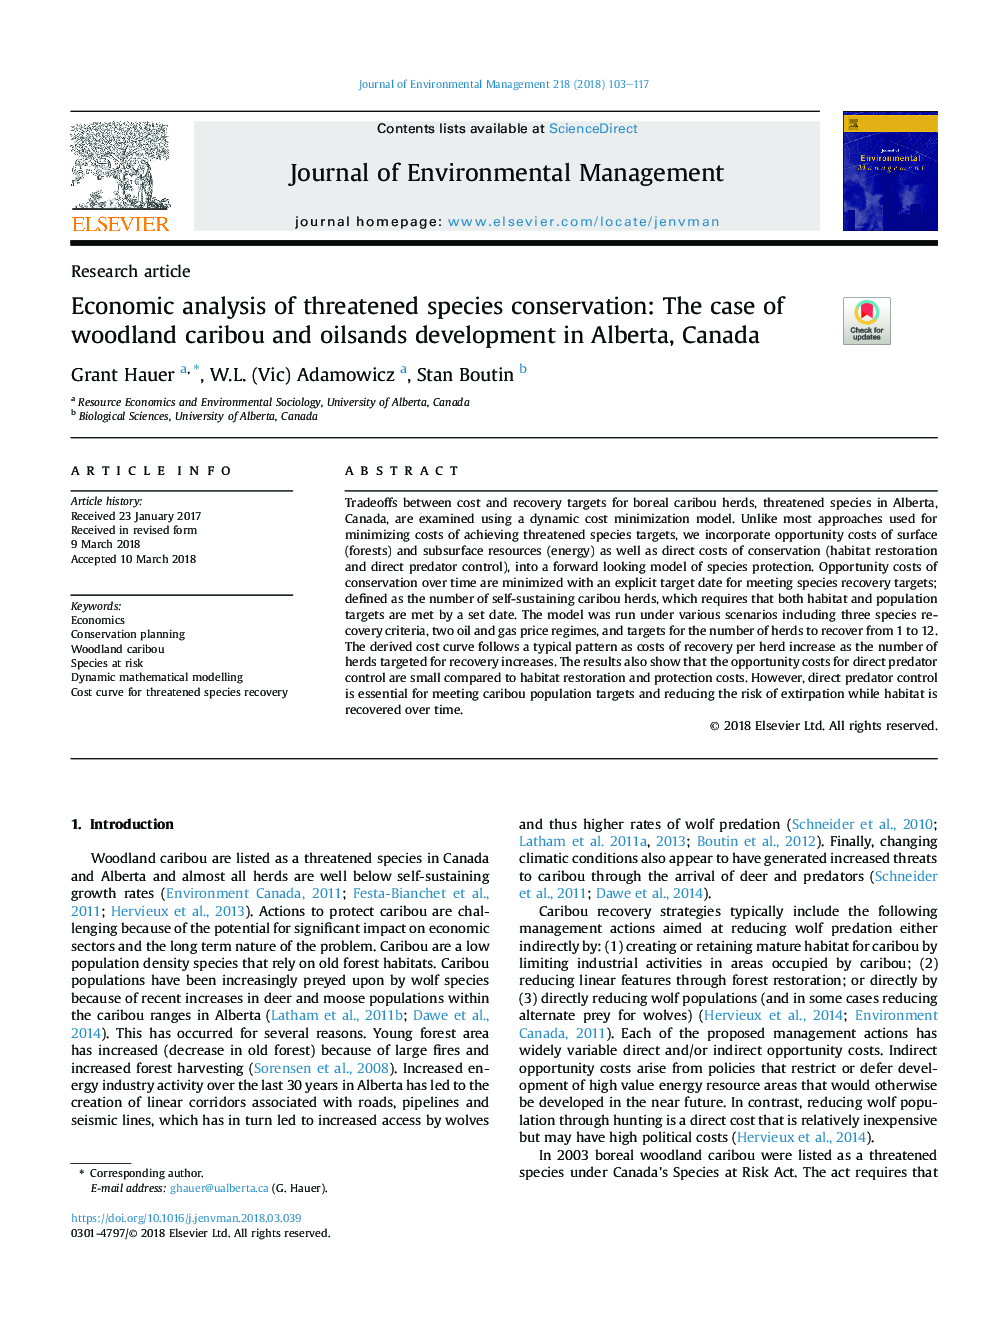 Economic analysis of threatened species conservation: The case of woodland caribou and oilsands development in Alberta, Canada